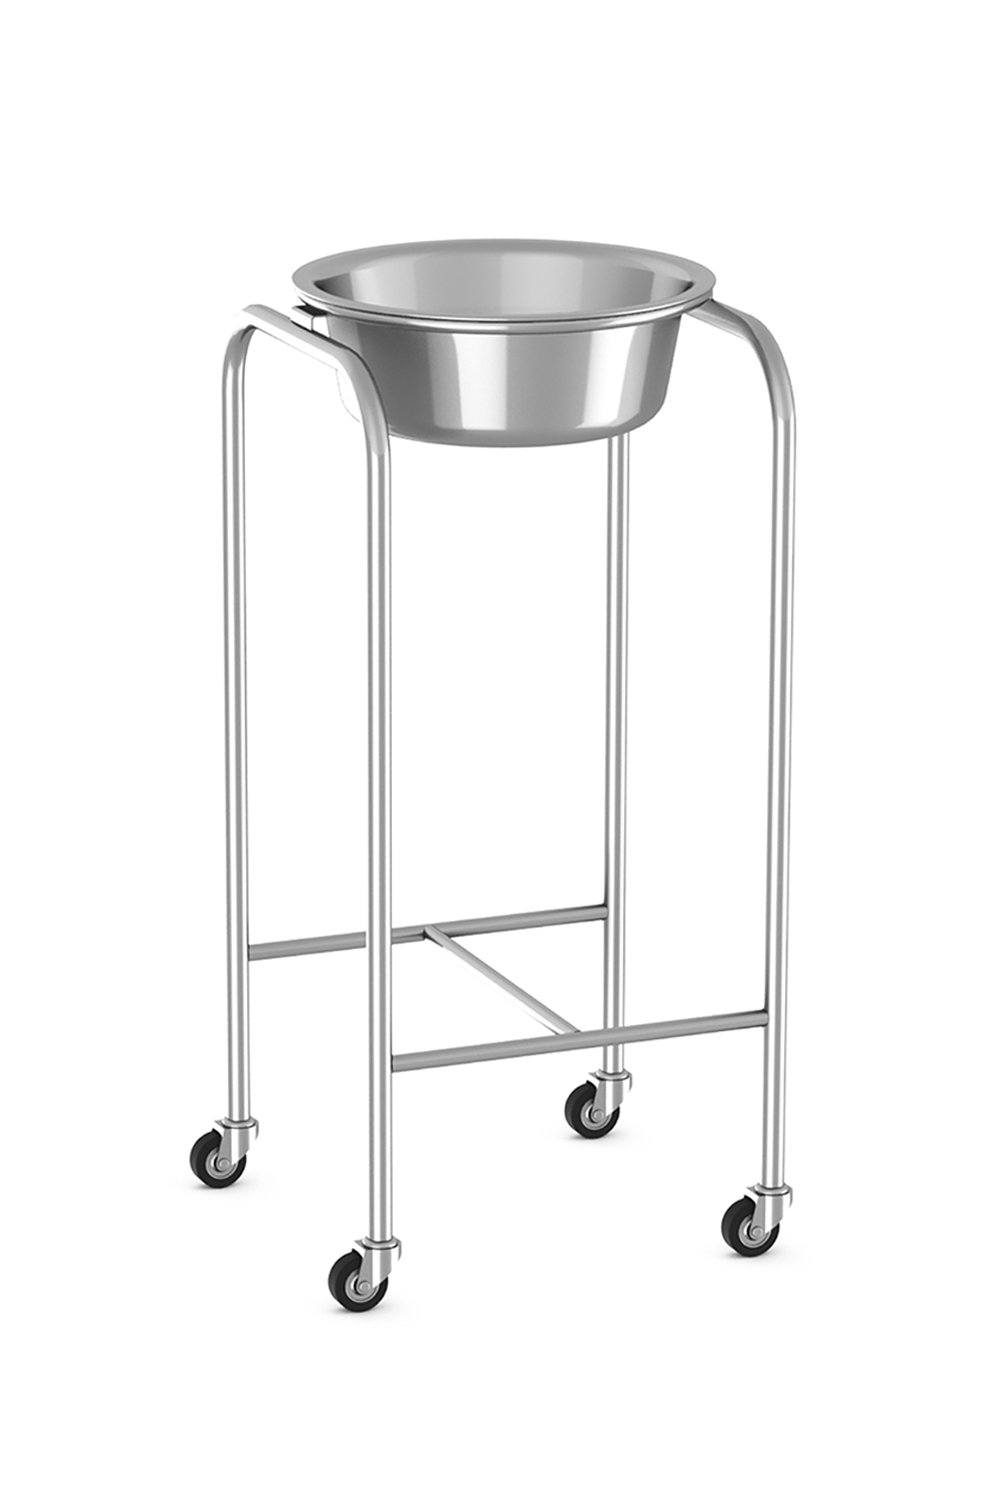 Solution Stand Stainless Solutions Acart 14"W x 14"D x 34"H 9-1/2 Quart Basin with H Brace 